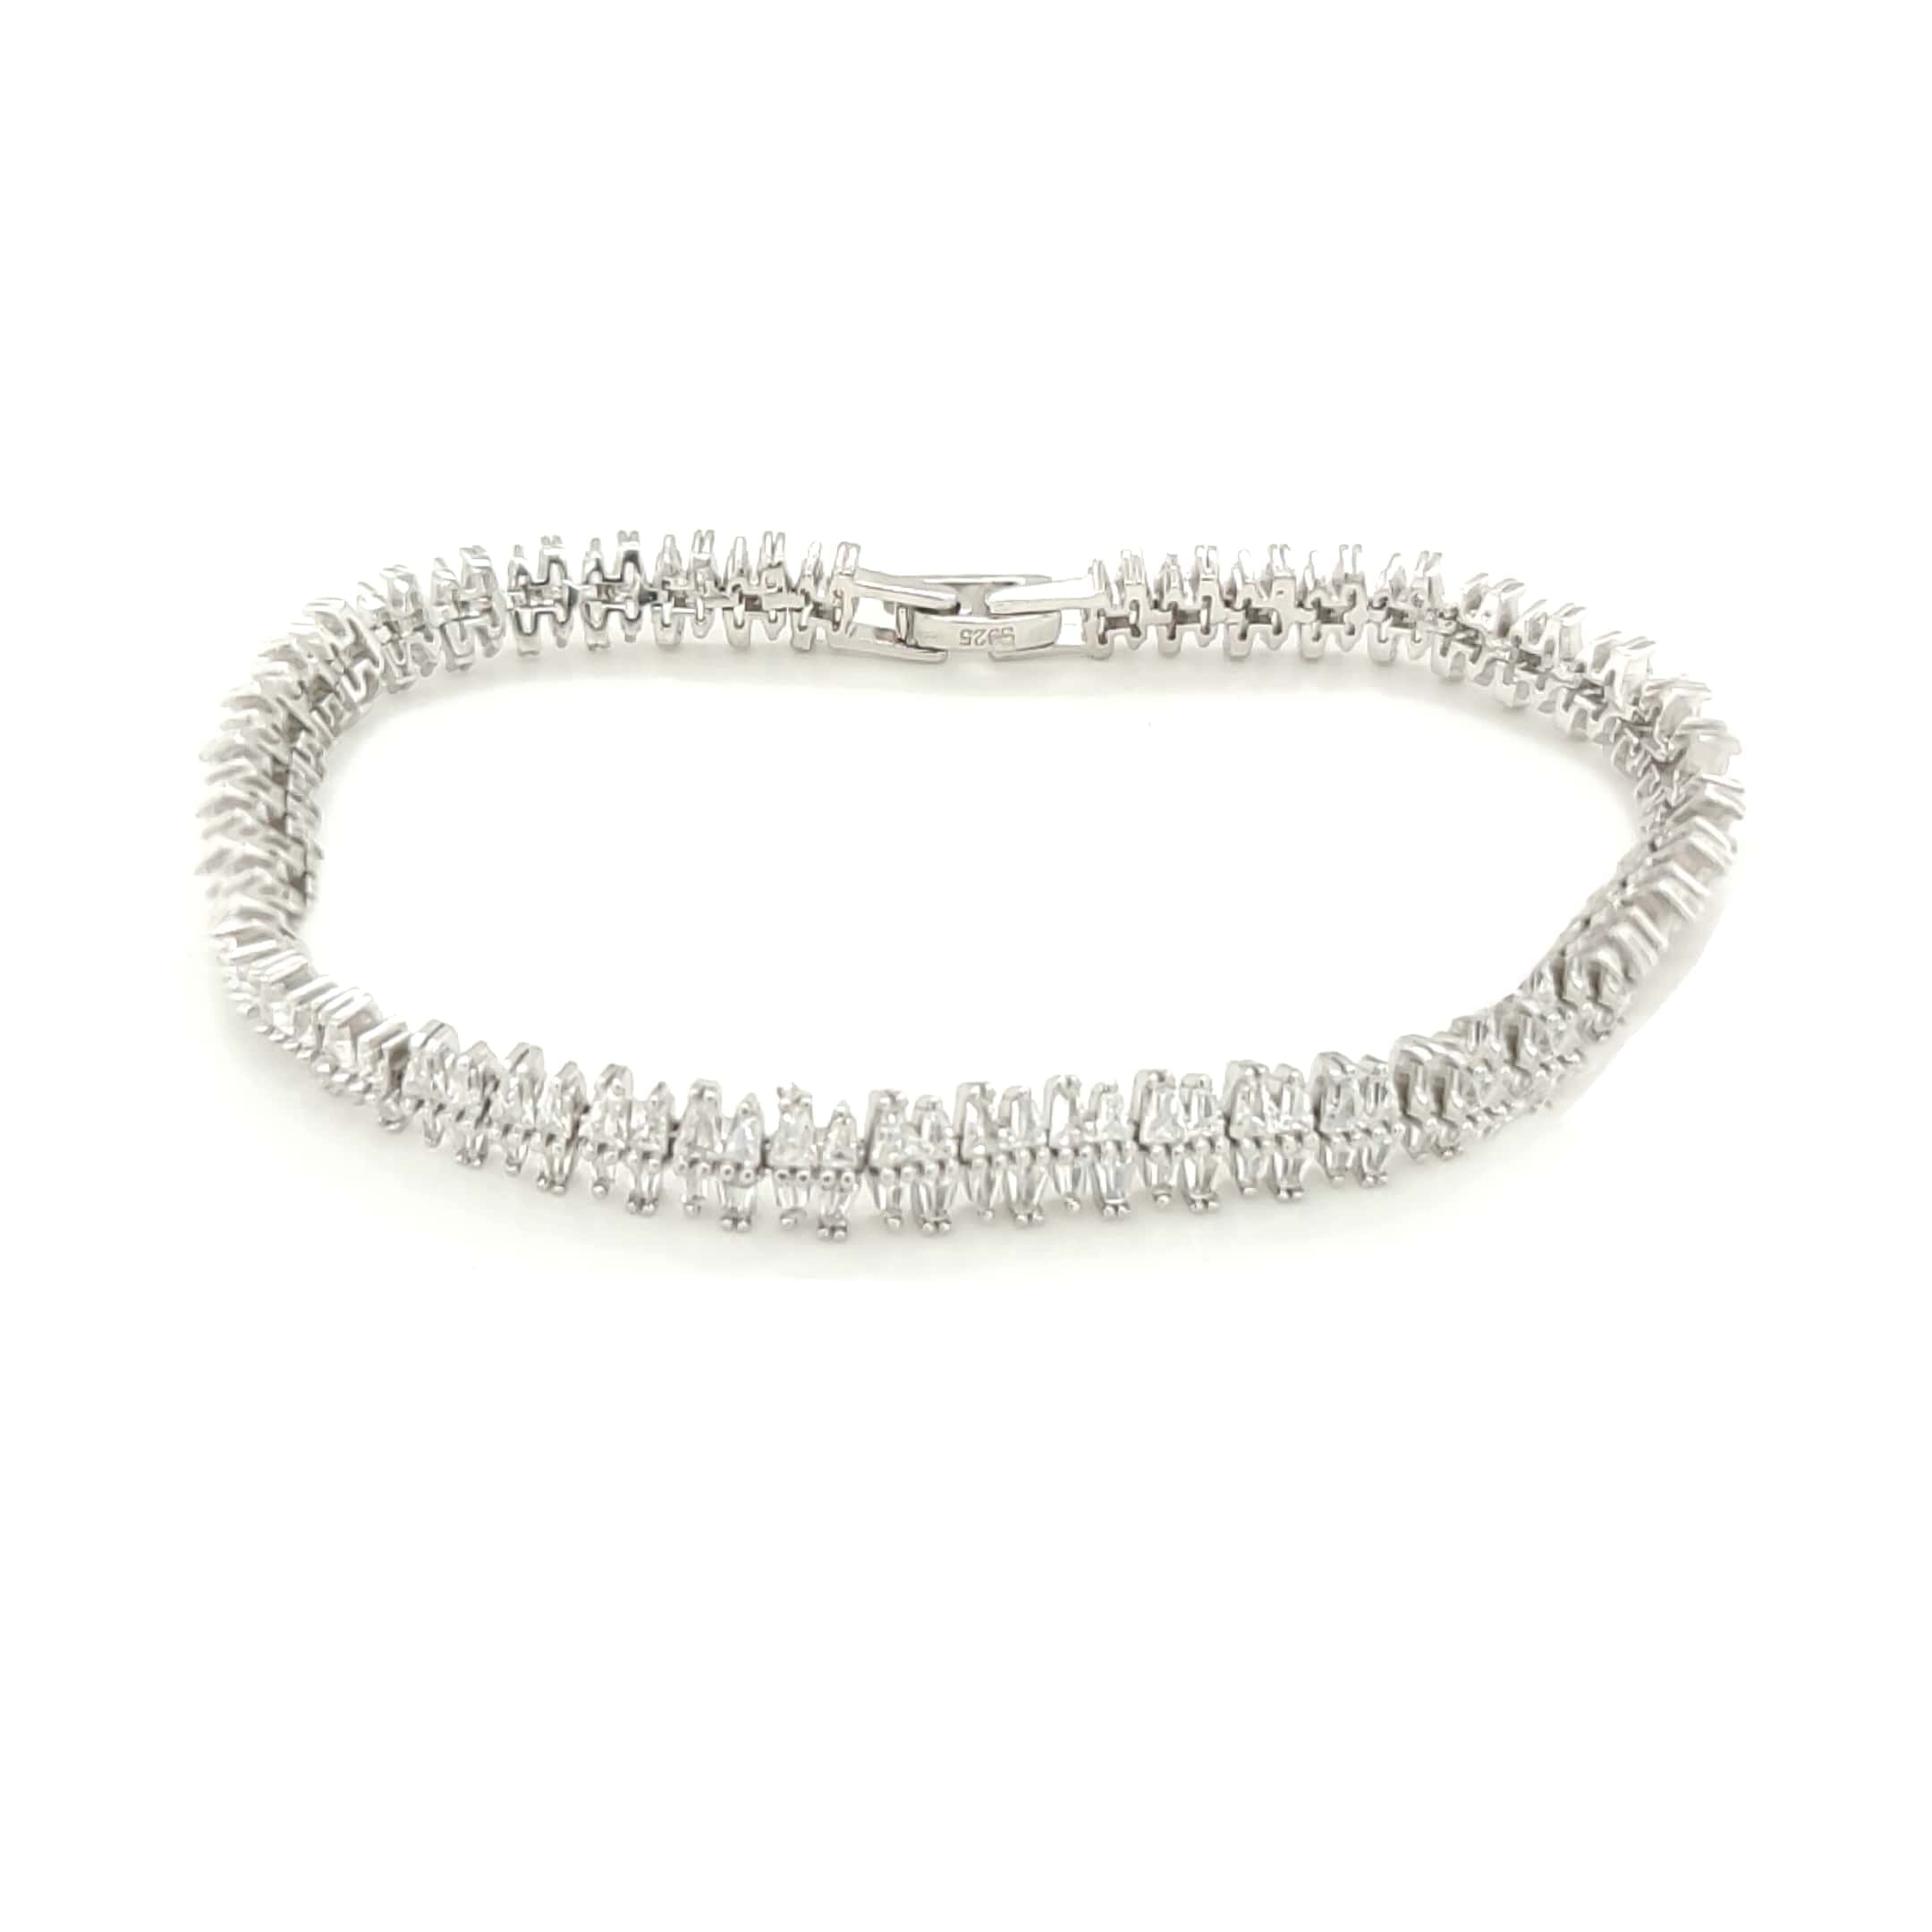 Asfour 925 Sterling Silver Tennis Bracelet Inlaid With Zircon Stones